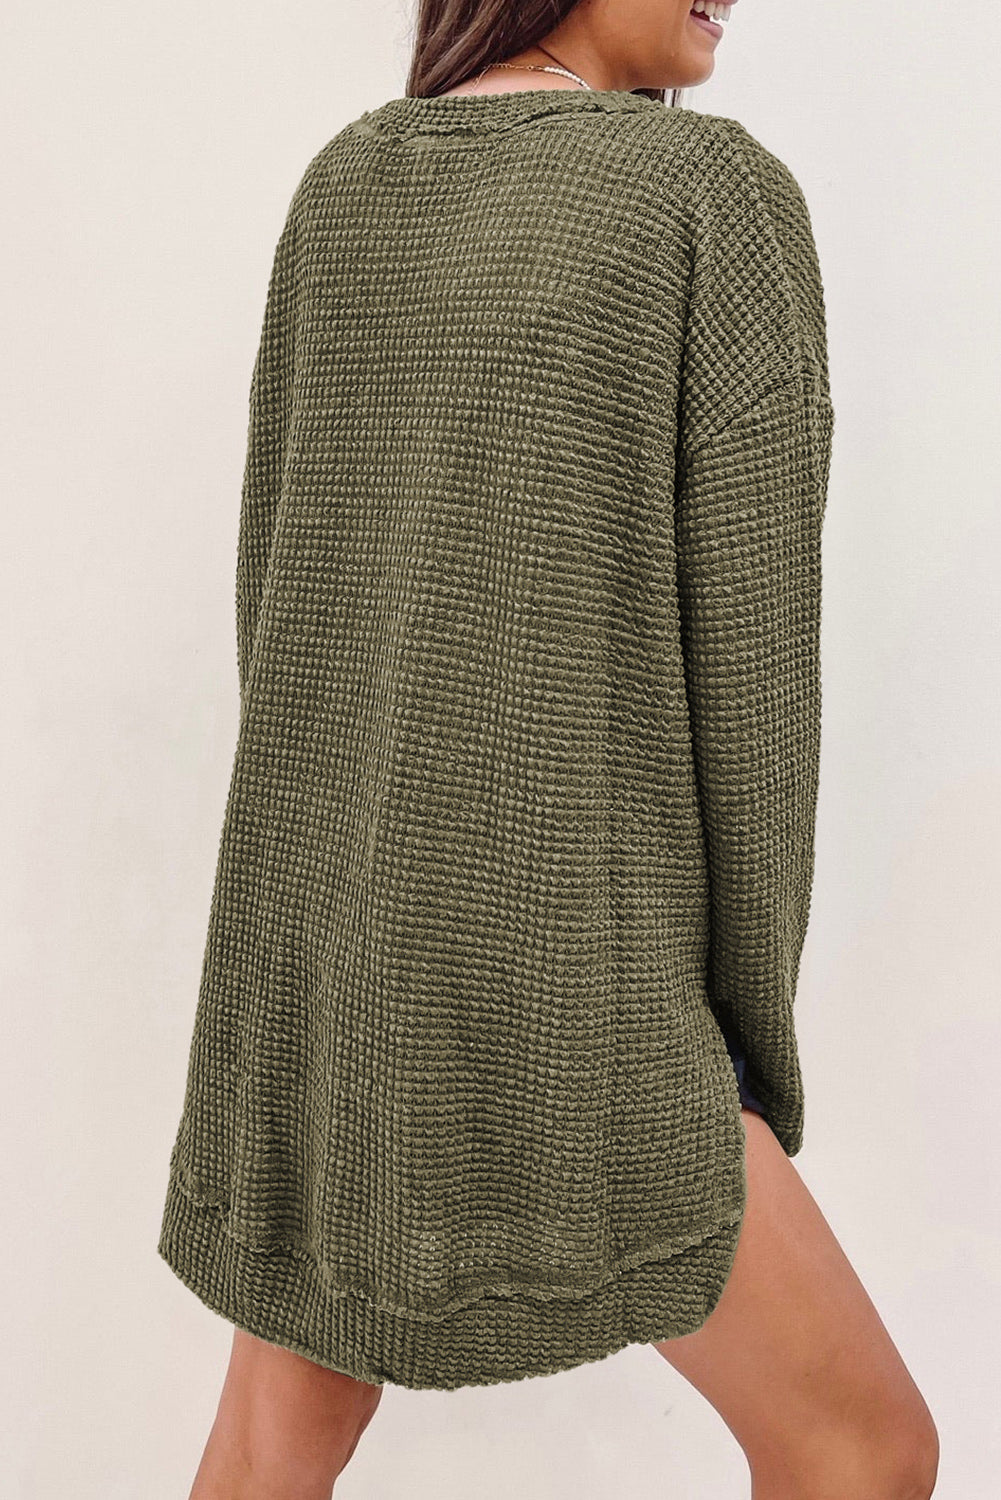 Green Waffle Knit High Slits Oversized Top MTS0176